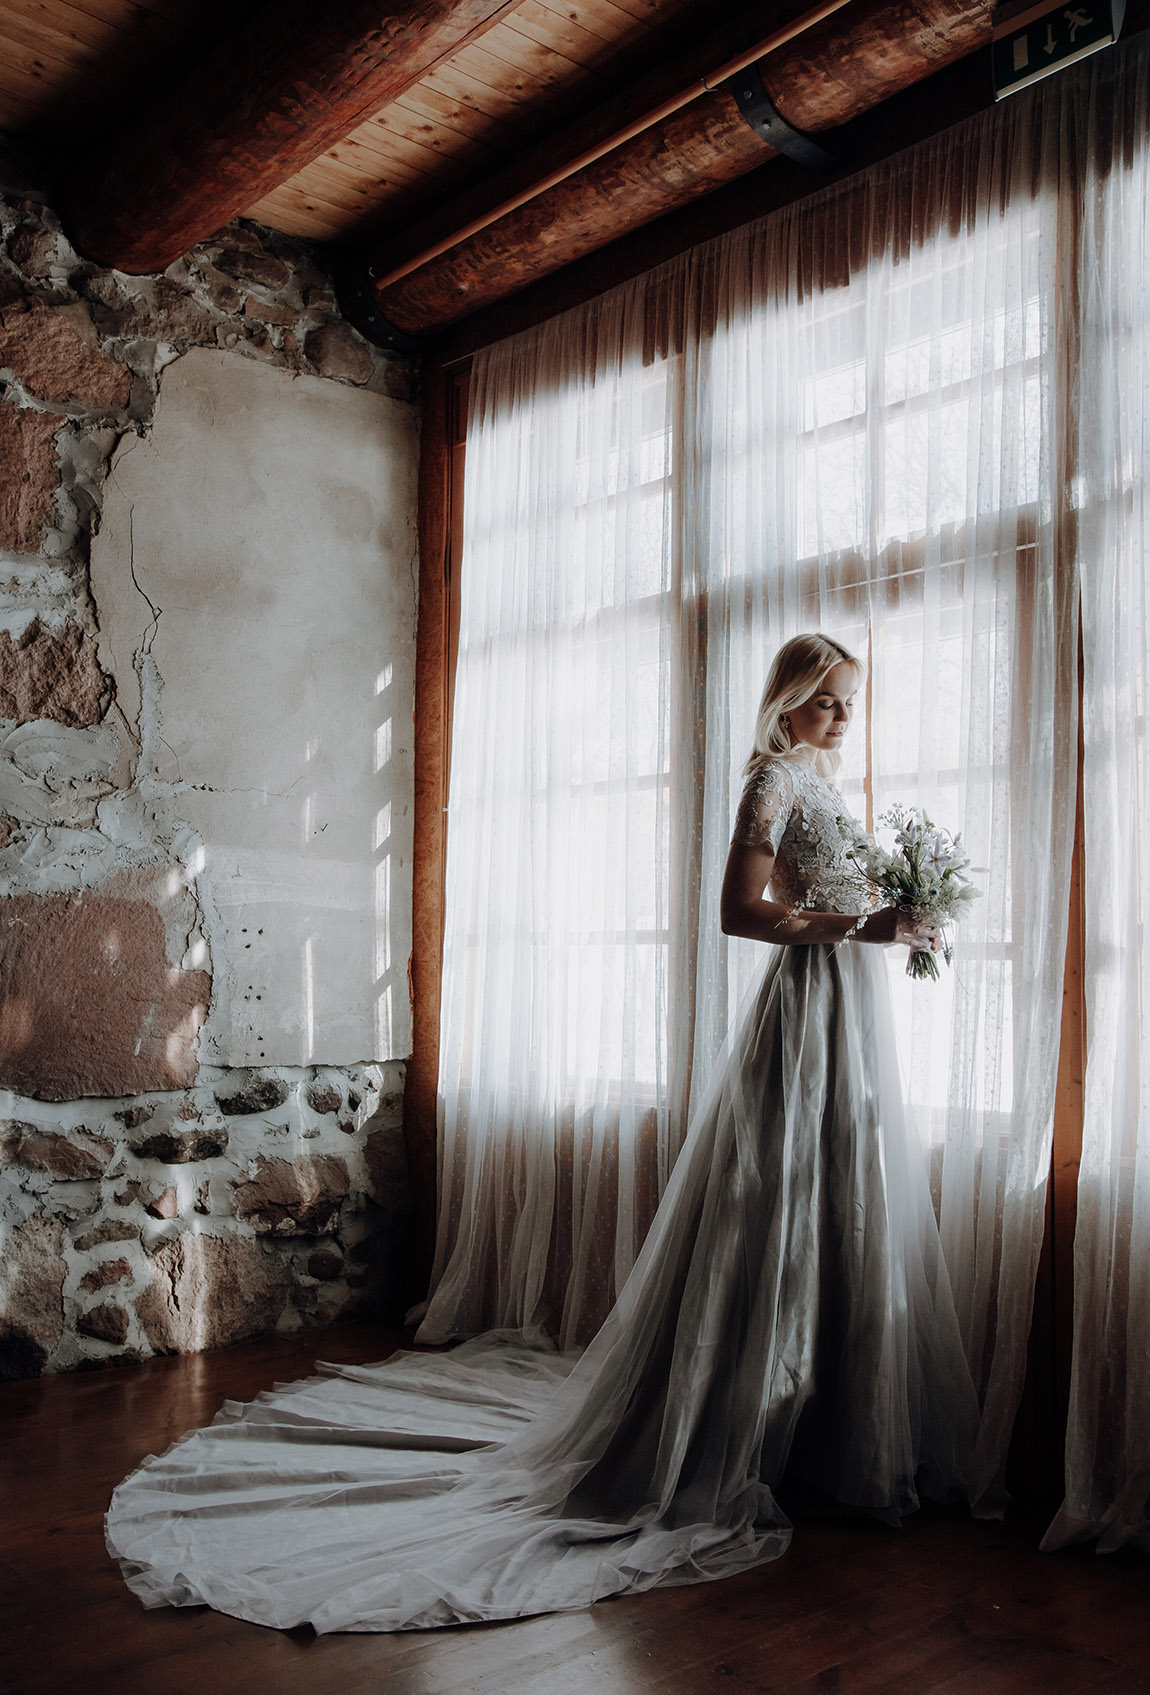 Ulfsby Gård: Celebrate an unforgettable day in picturesque surroundings